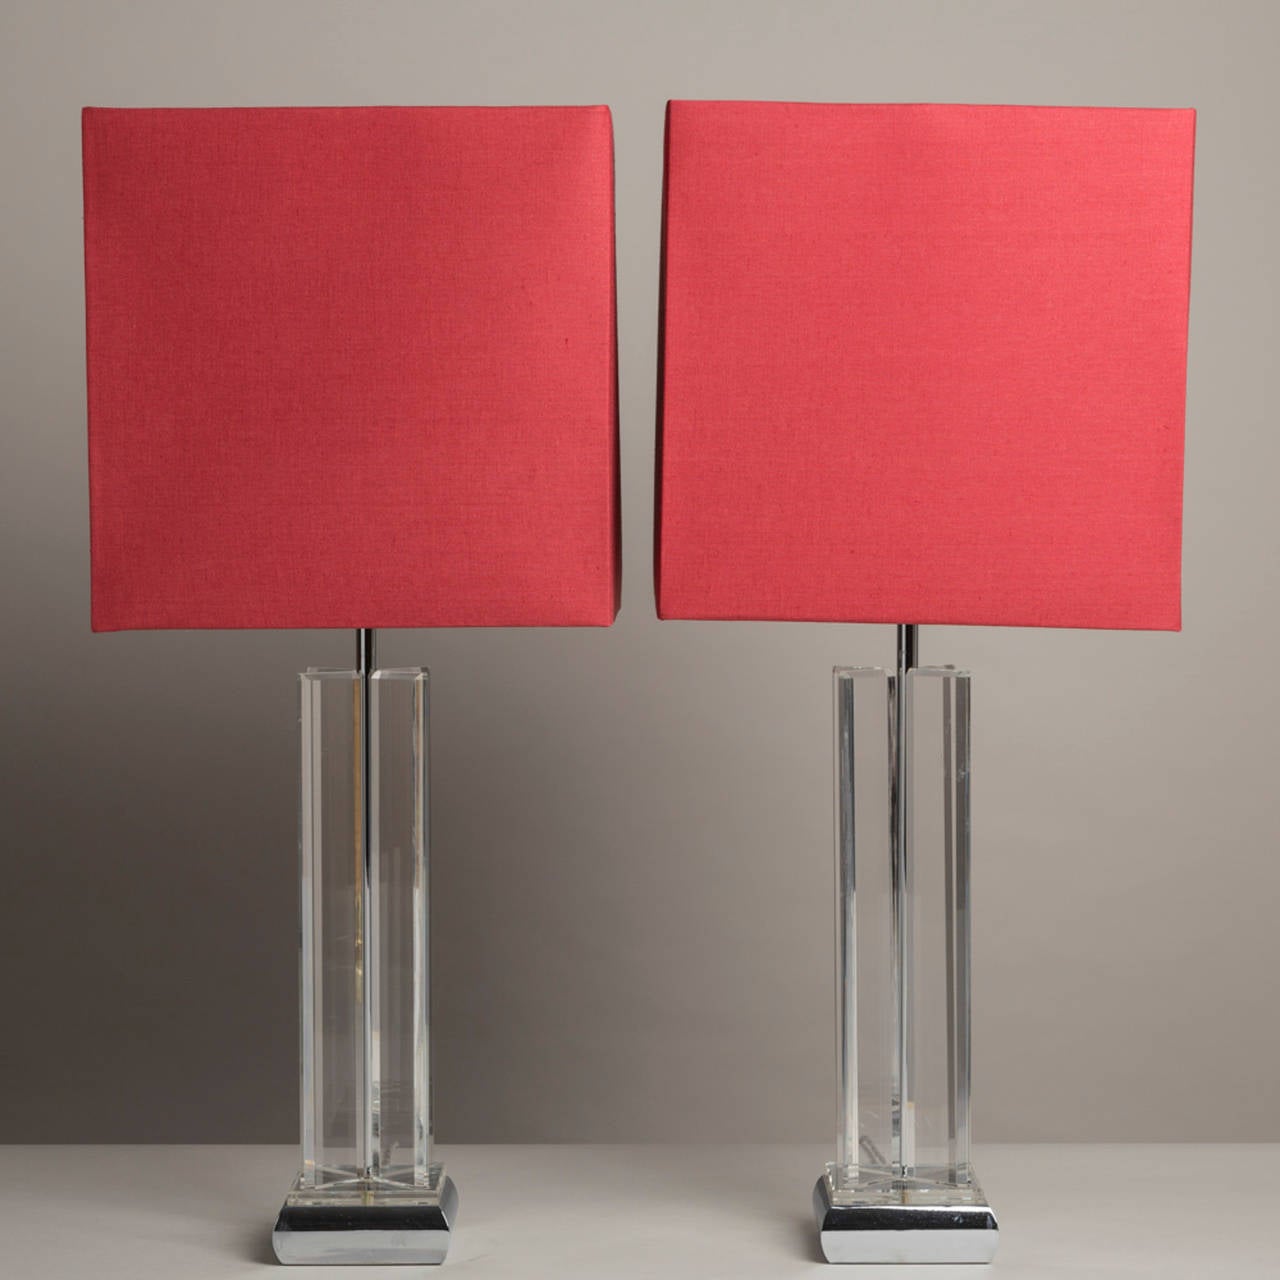 A pair of Lucite columned table lamps with square chrome bases, 1970s

Prices include 20% VAT which is removed for items shipped outside the EU.